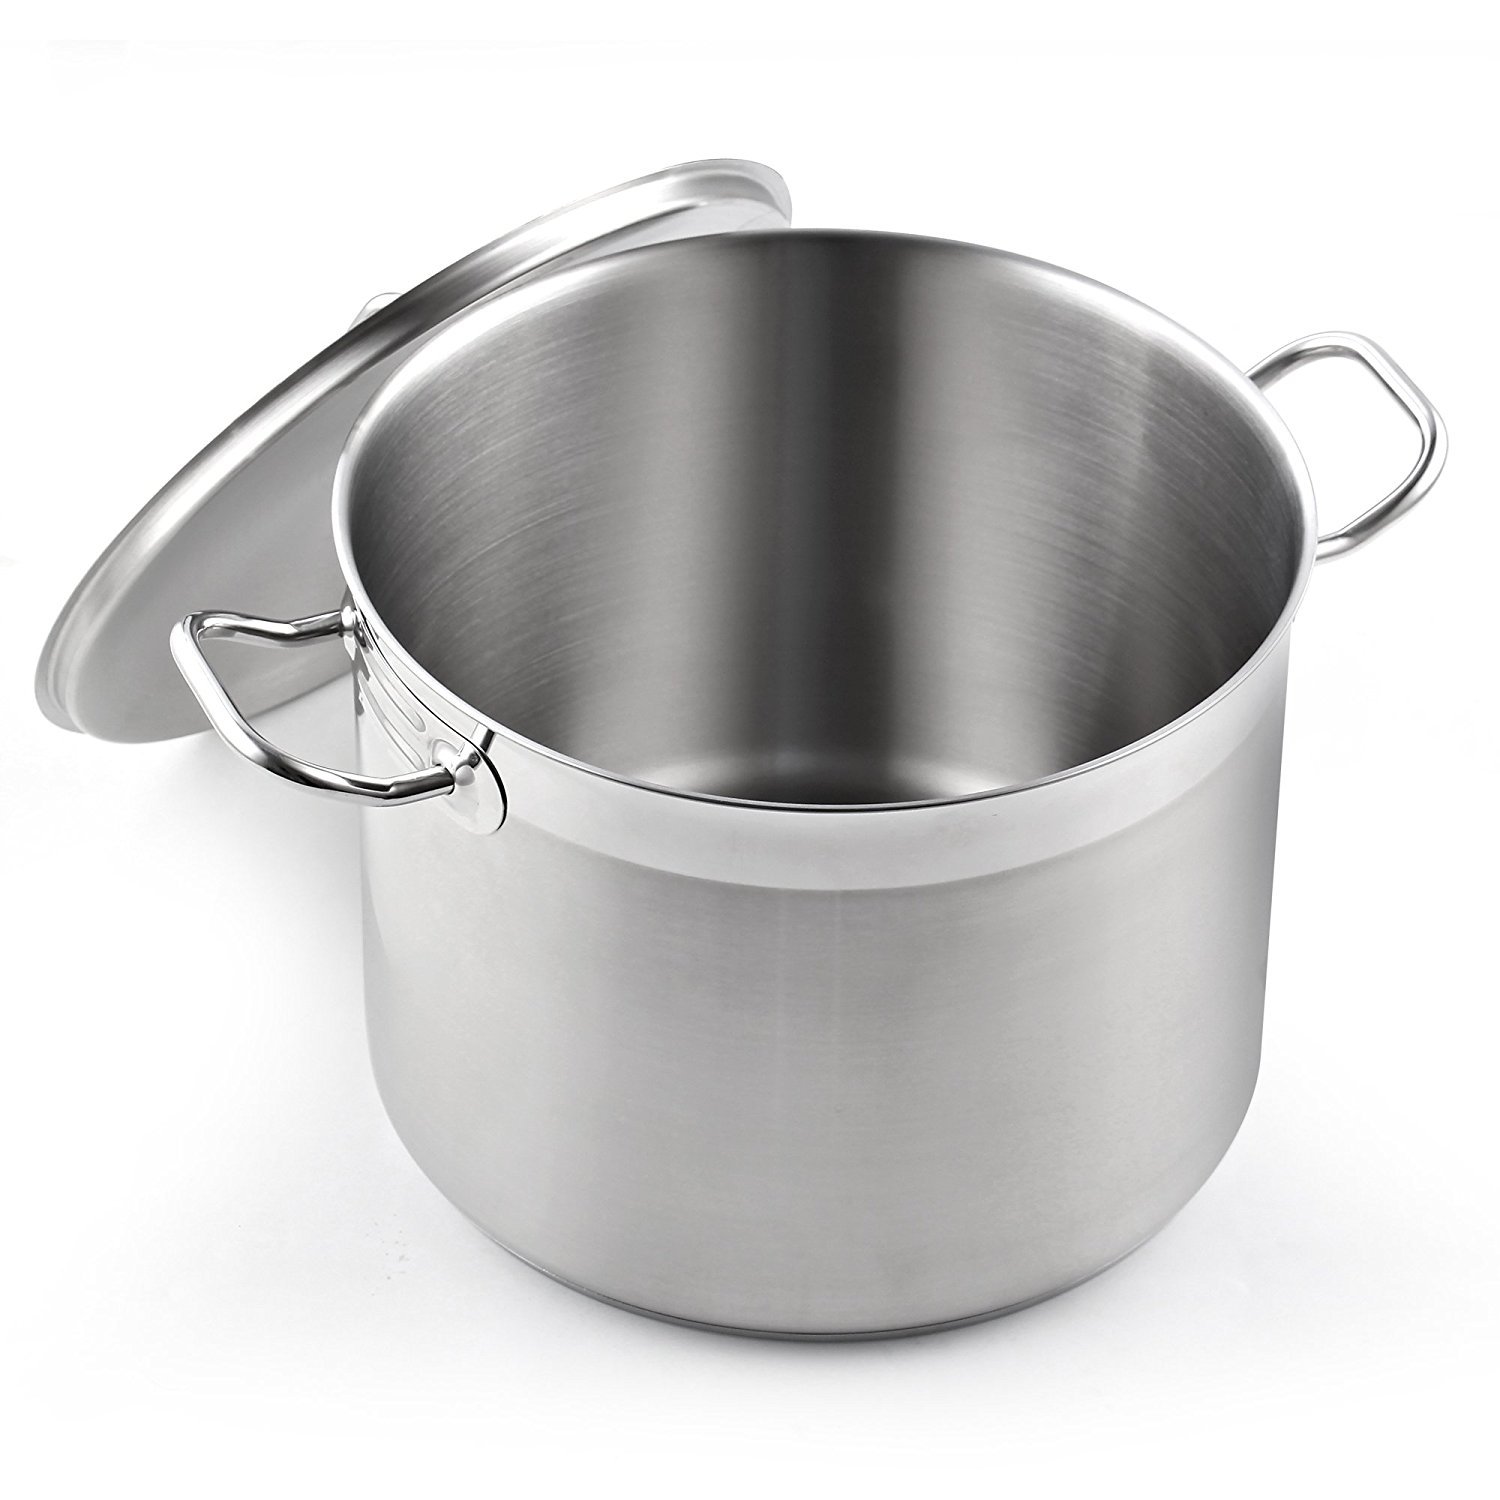 Cooks Standard Stockpots Stainless Steel, 8 Quart Professional Grade Stock Pot with Lid, Silver - image 1 of 8